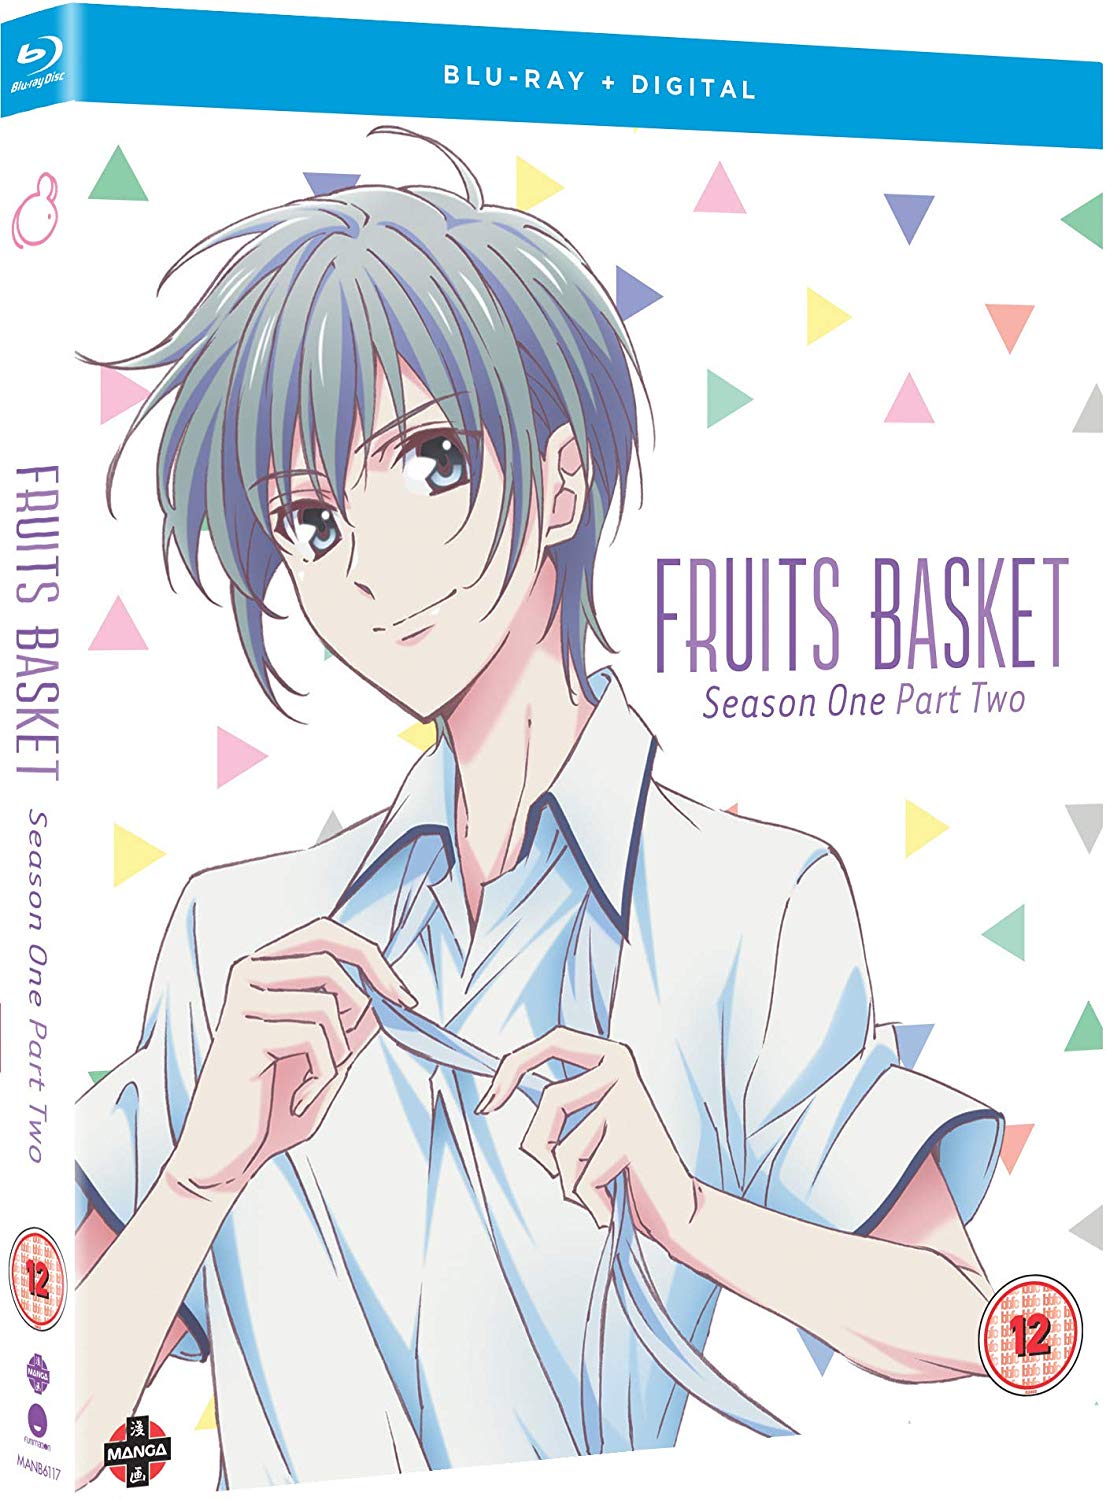 Kyo Soma Voice - Fruits Basket (2019) (TV Show) - Behind The Voice Actors